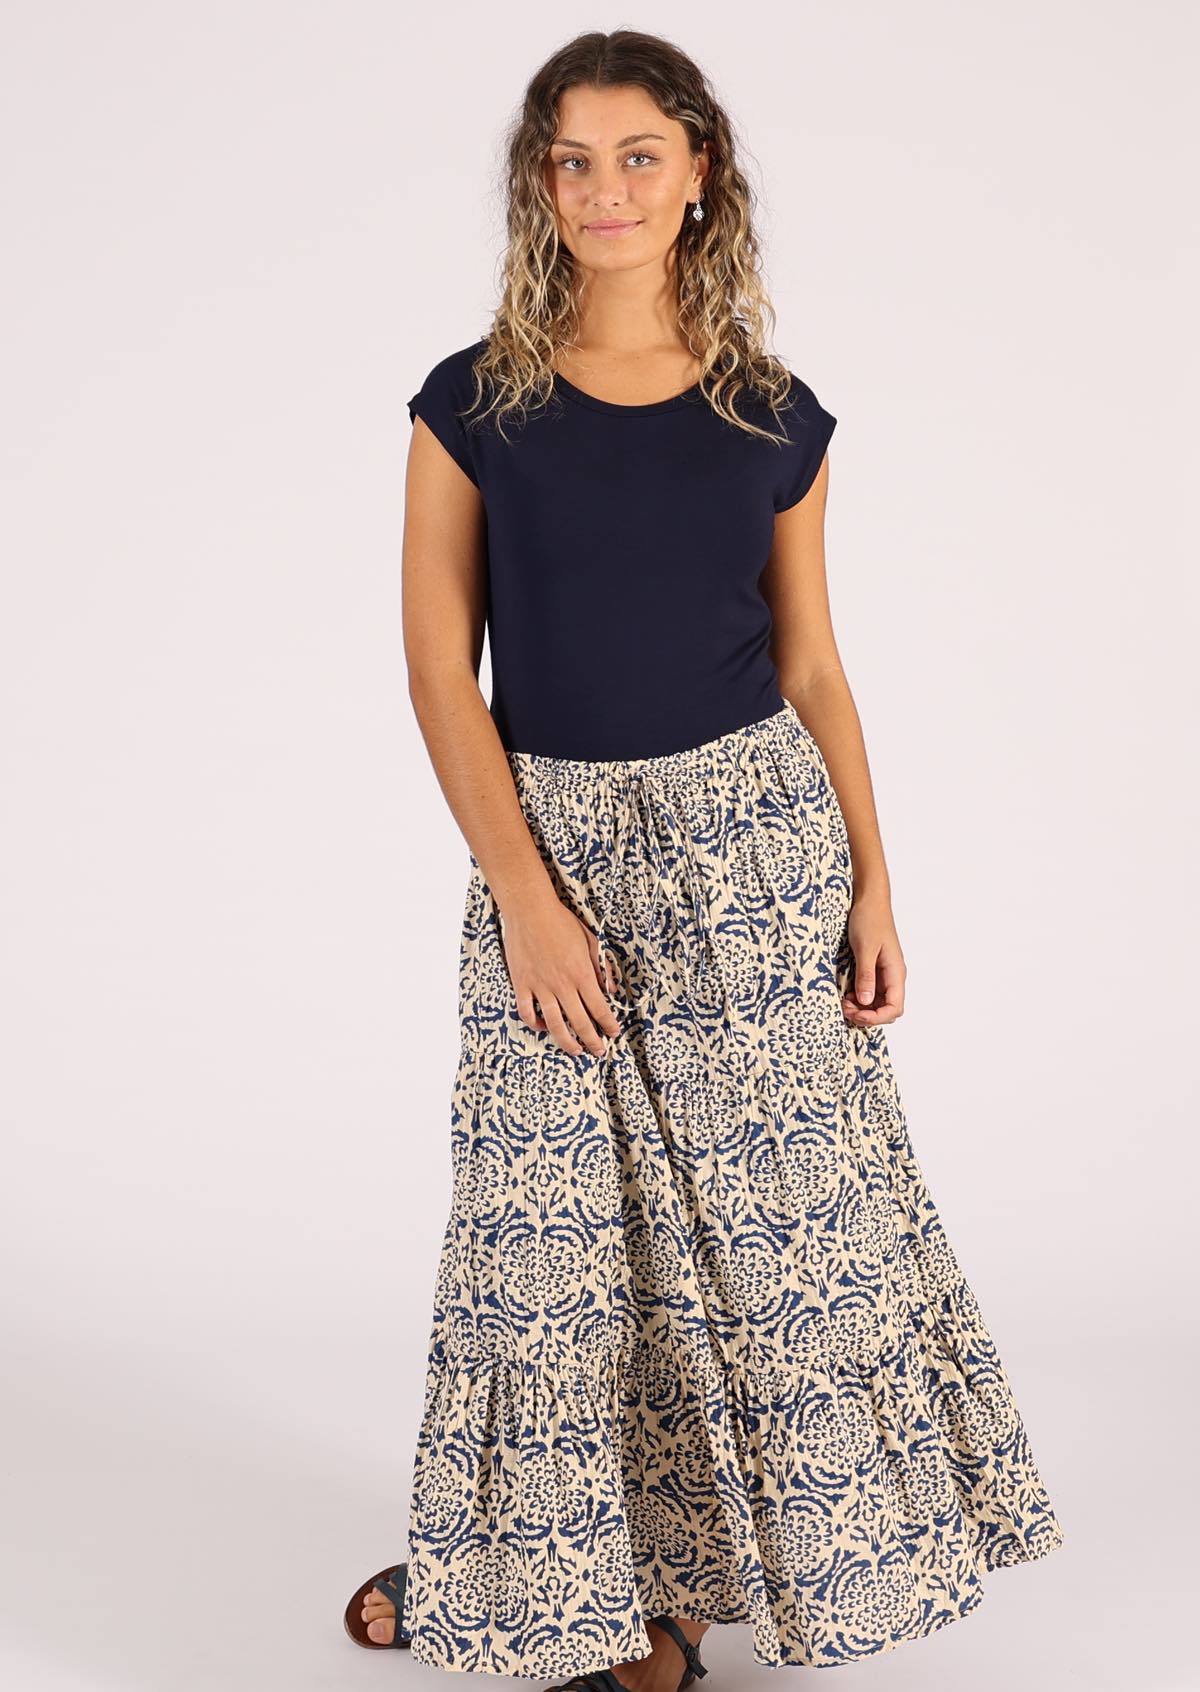 3 tiers of cotton form this gorgeous maxi skirt